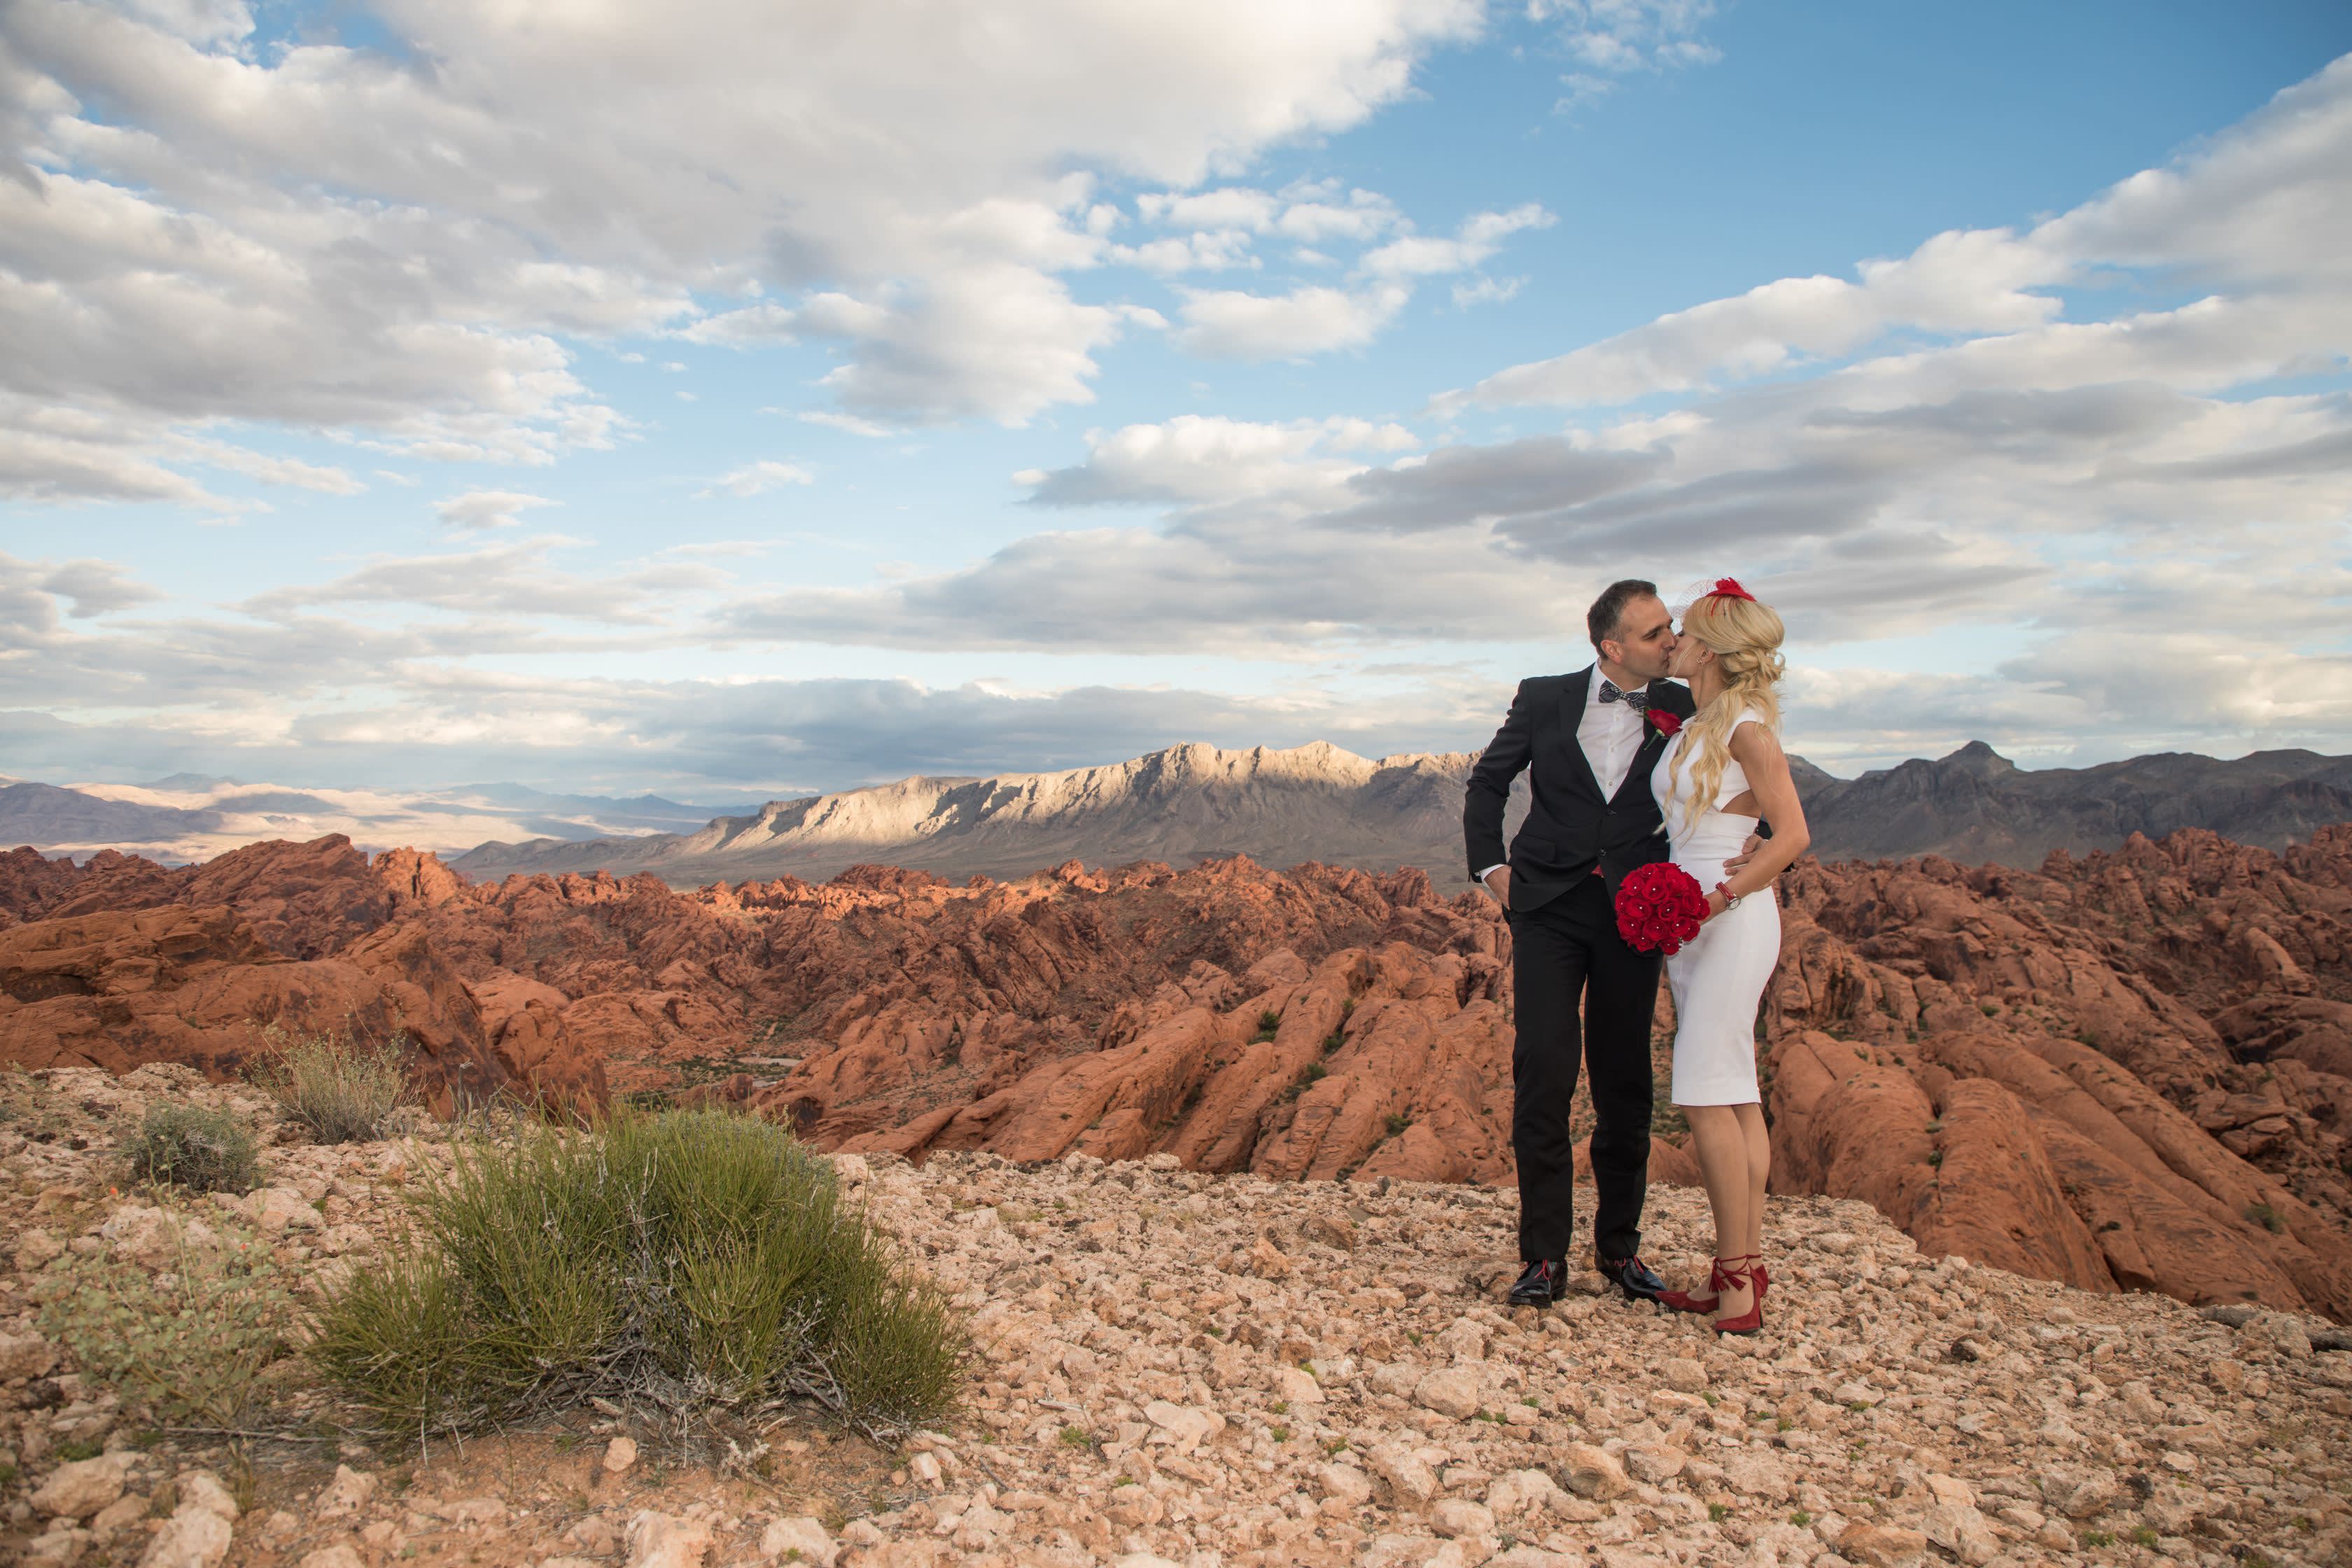 Helicopter Wedding Ceremony Starting at $299